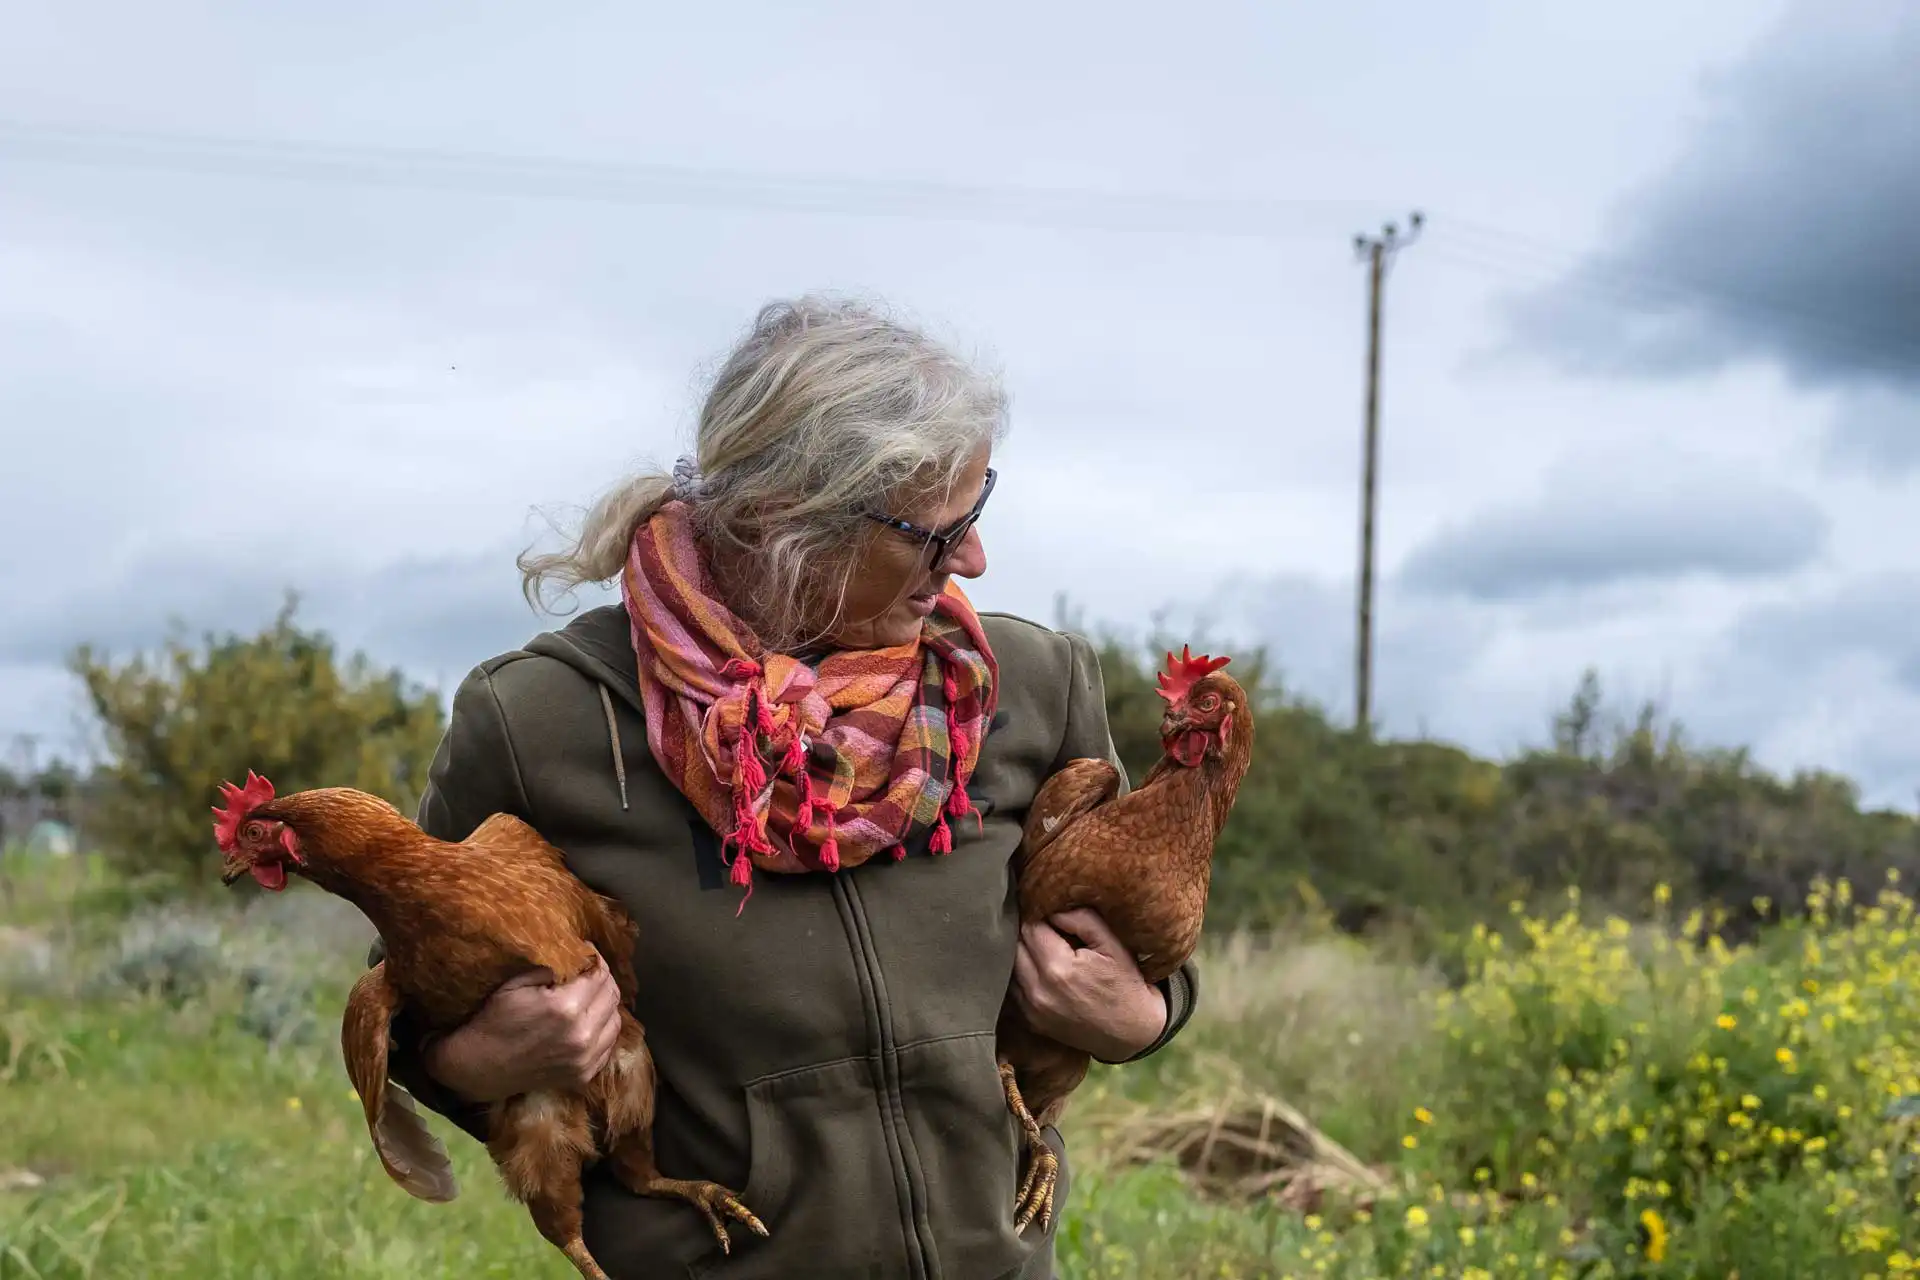 Paphos Green Goddess is holding two chicken in her arms